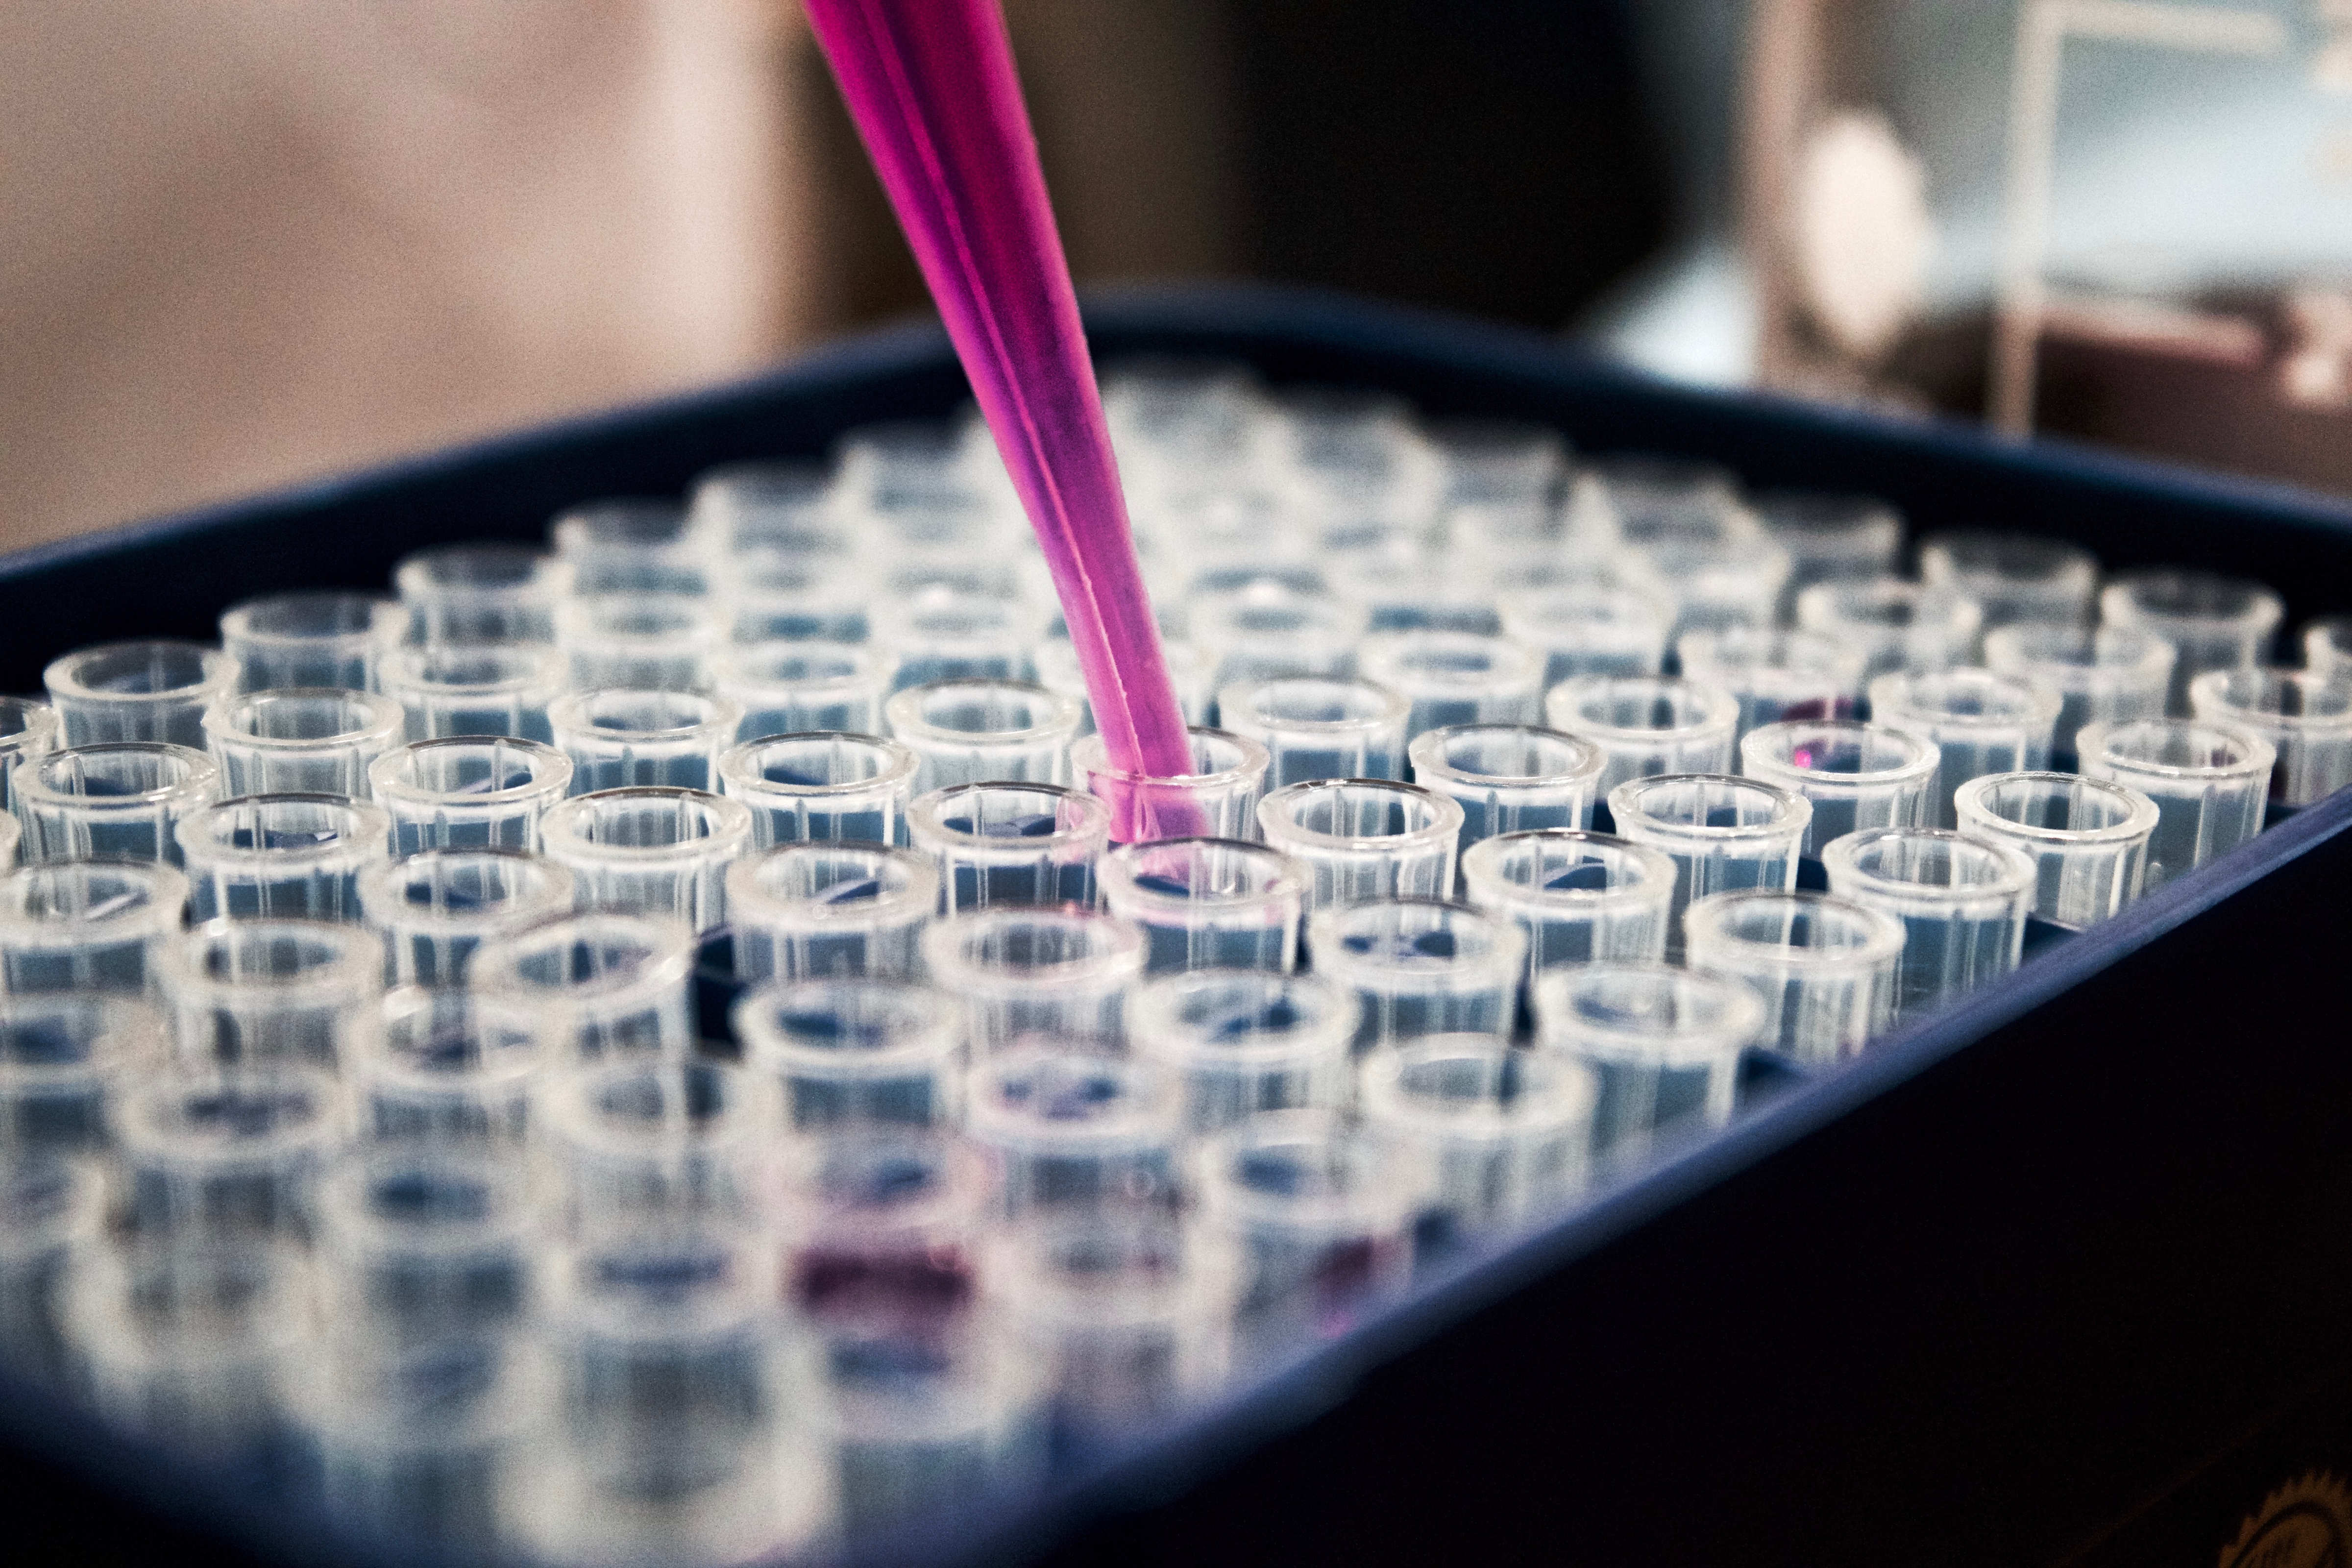 Filling liquid from pipette into test tubes. Photo: Louis Reed / Unsplash.